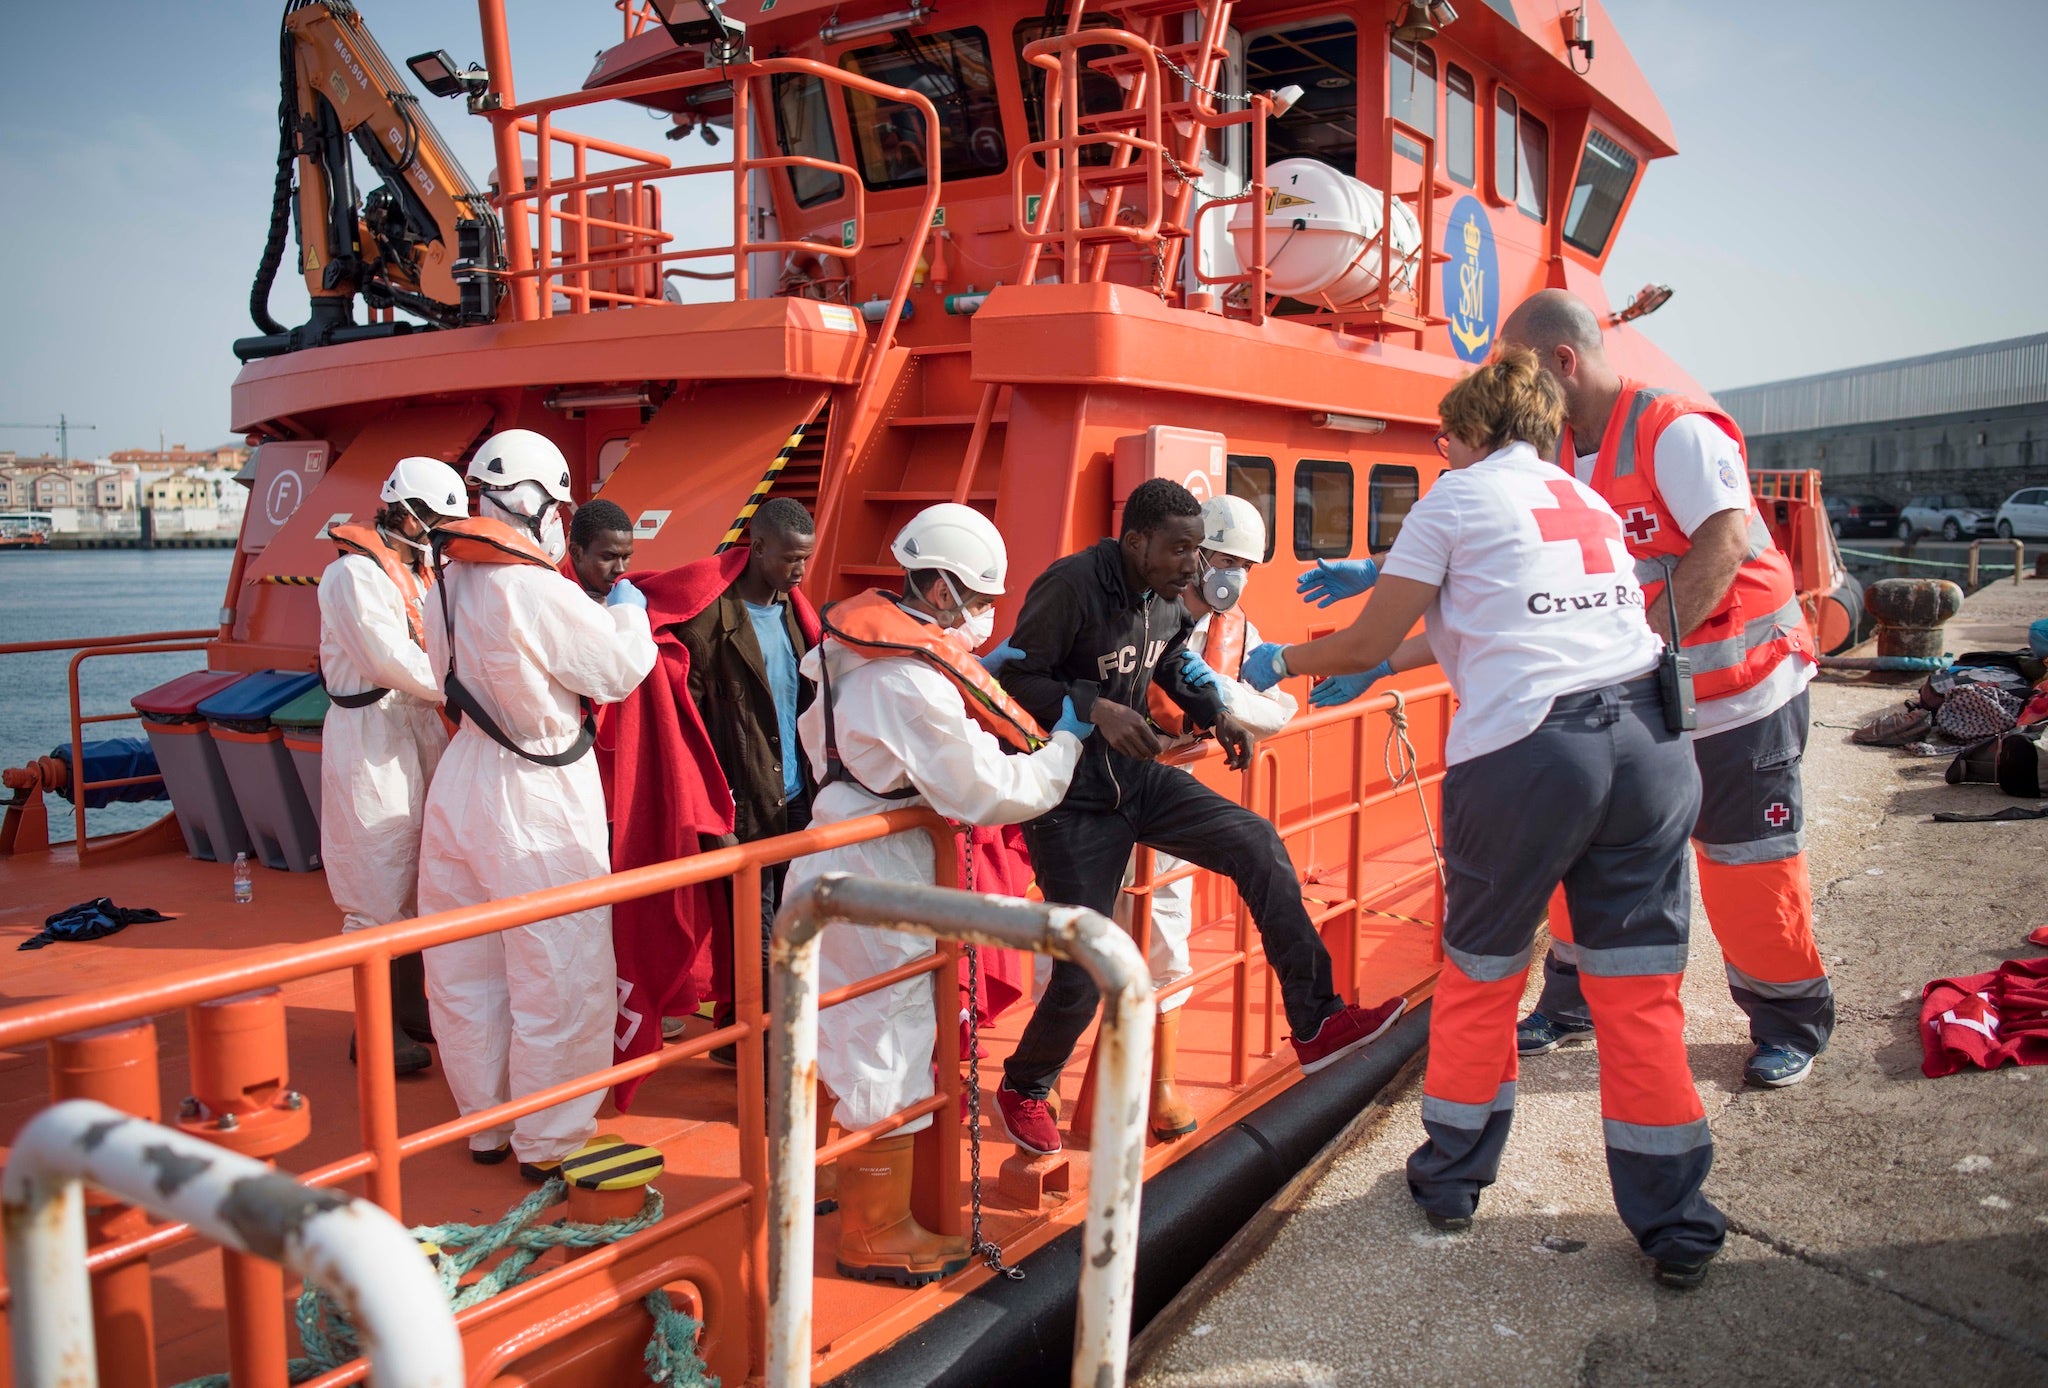 Charities such as the Red Cross have rescued over 15,000 people in the Strait of Gibraltar this year